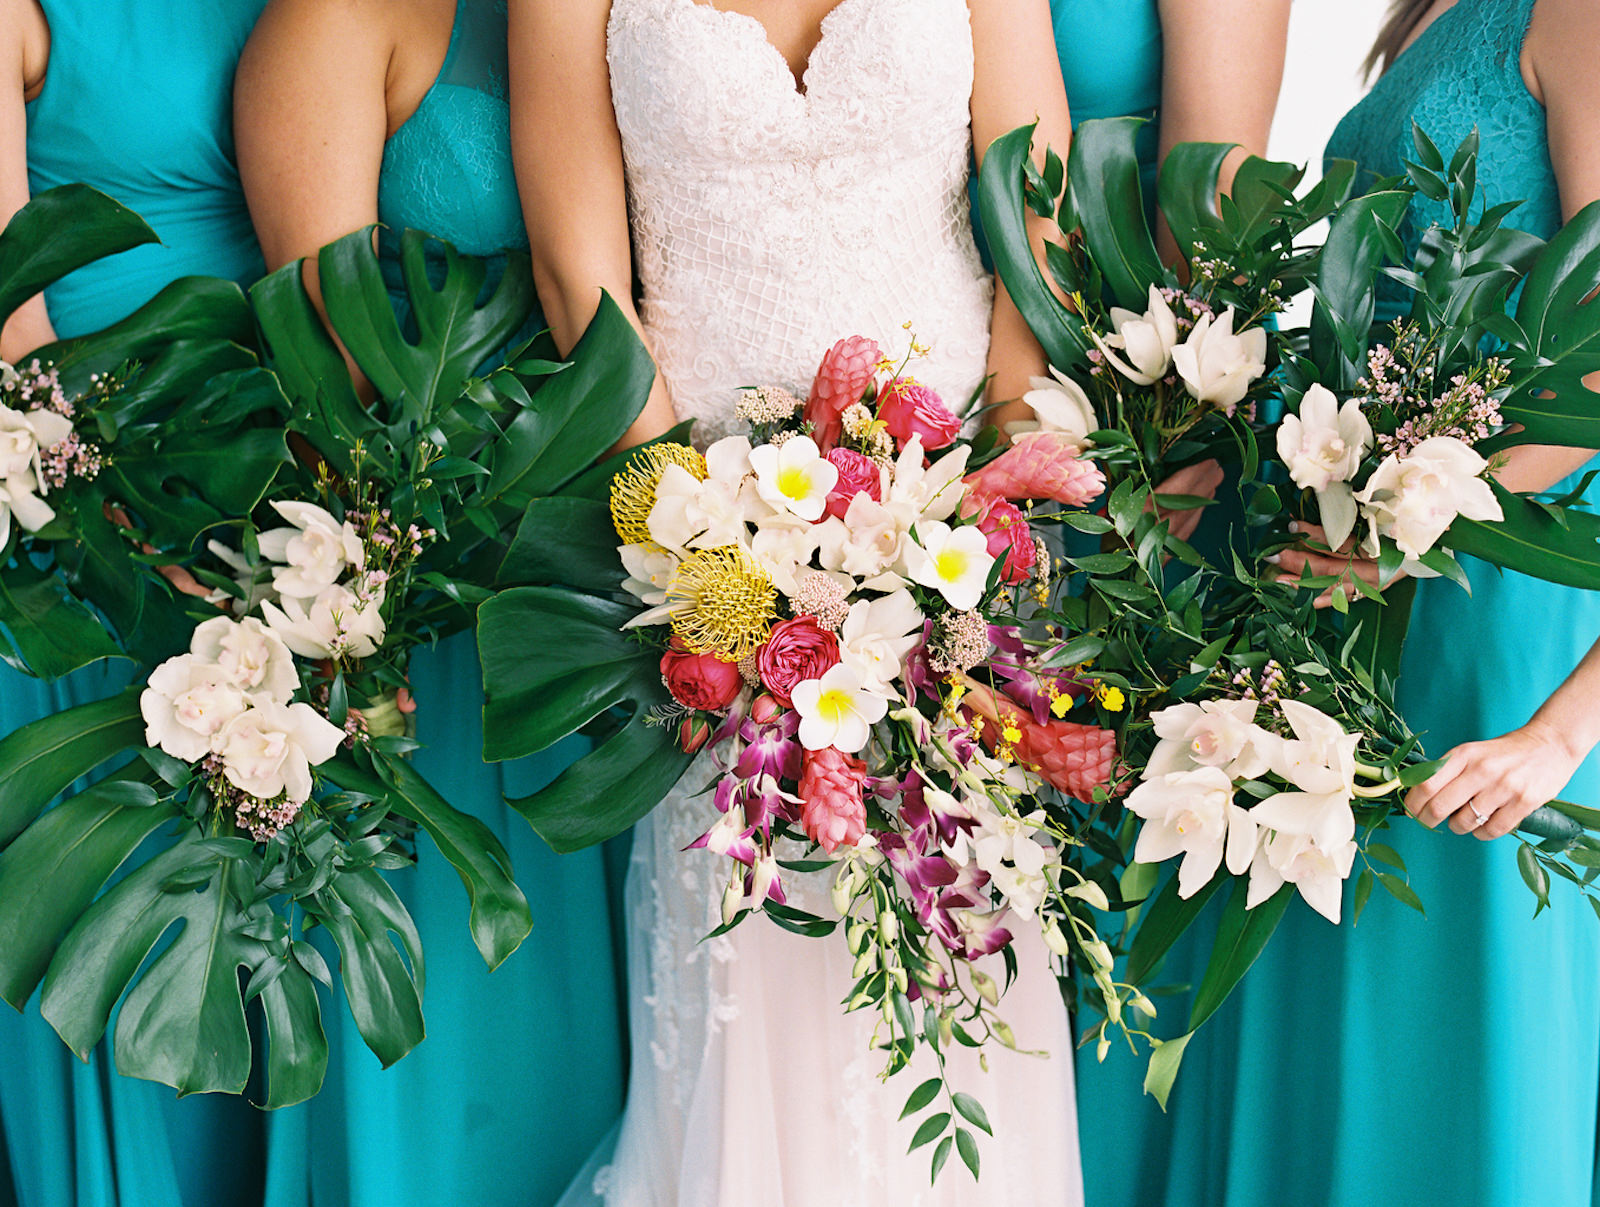 Tampa Bay Bride in Lace Wedding Dress with Bridesmaids in Mix and Match Teal Dresses Holding Tropical Floral Bouquets, Tropical Pink Ginger, Yellow Pincushion Protea, Purple Orchid, Greenery, Monstera Palm Tree Leaves Flowers